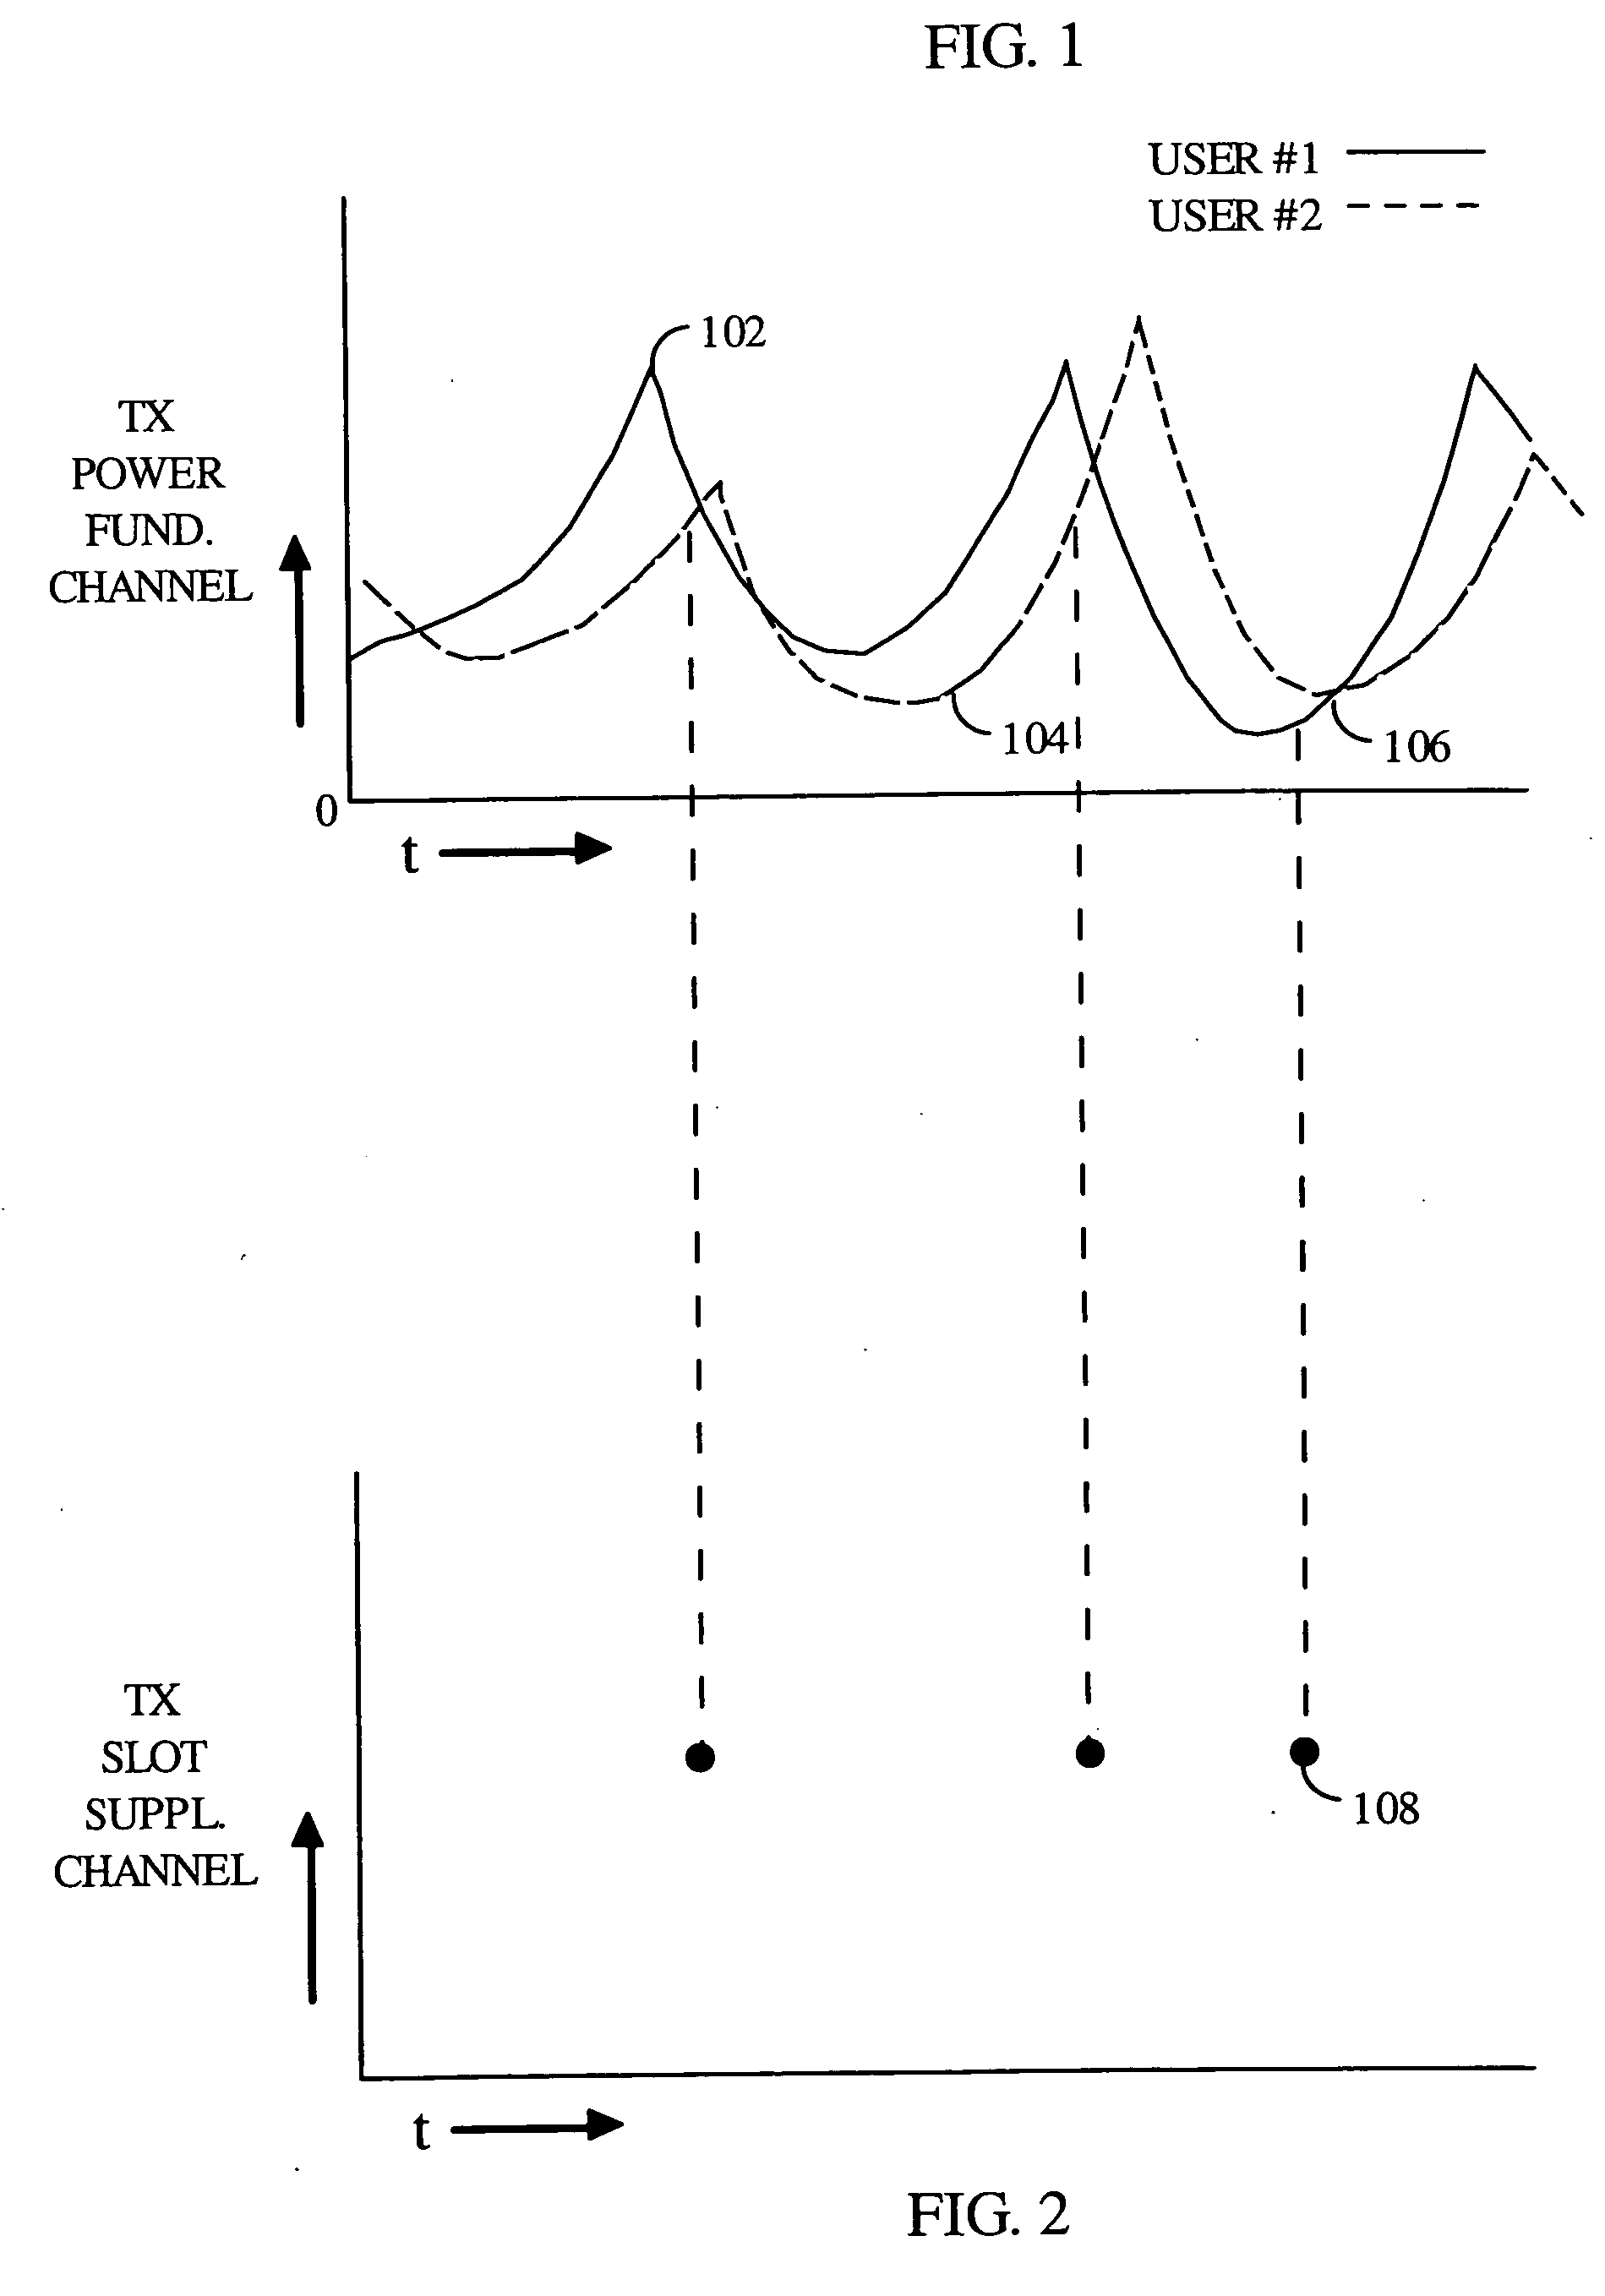 Forward-link scheduling in a wireless communication system